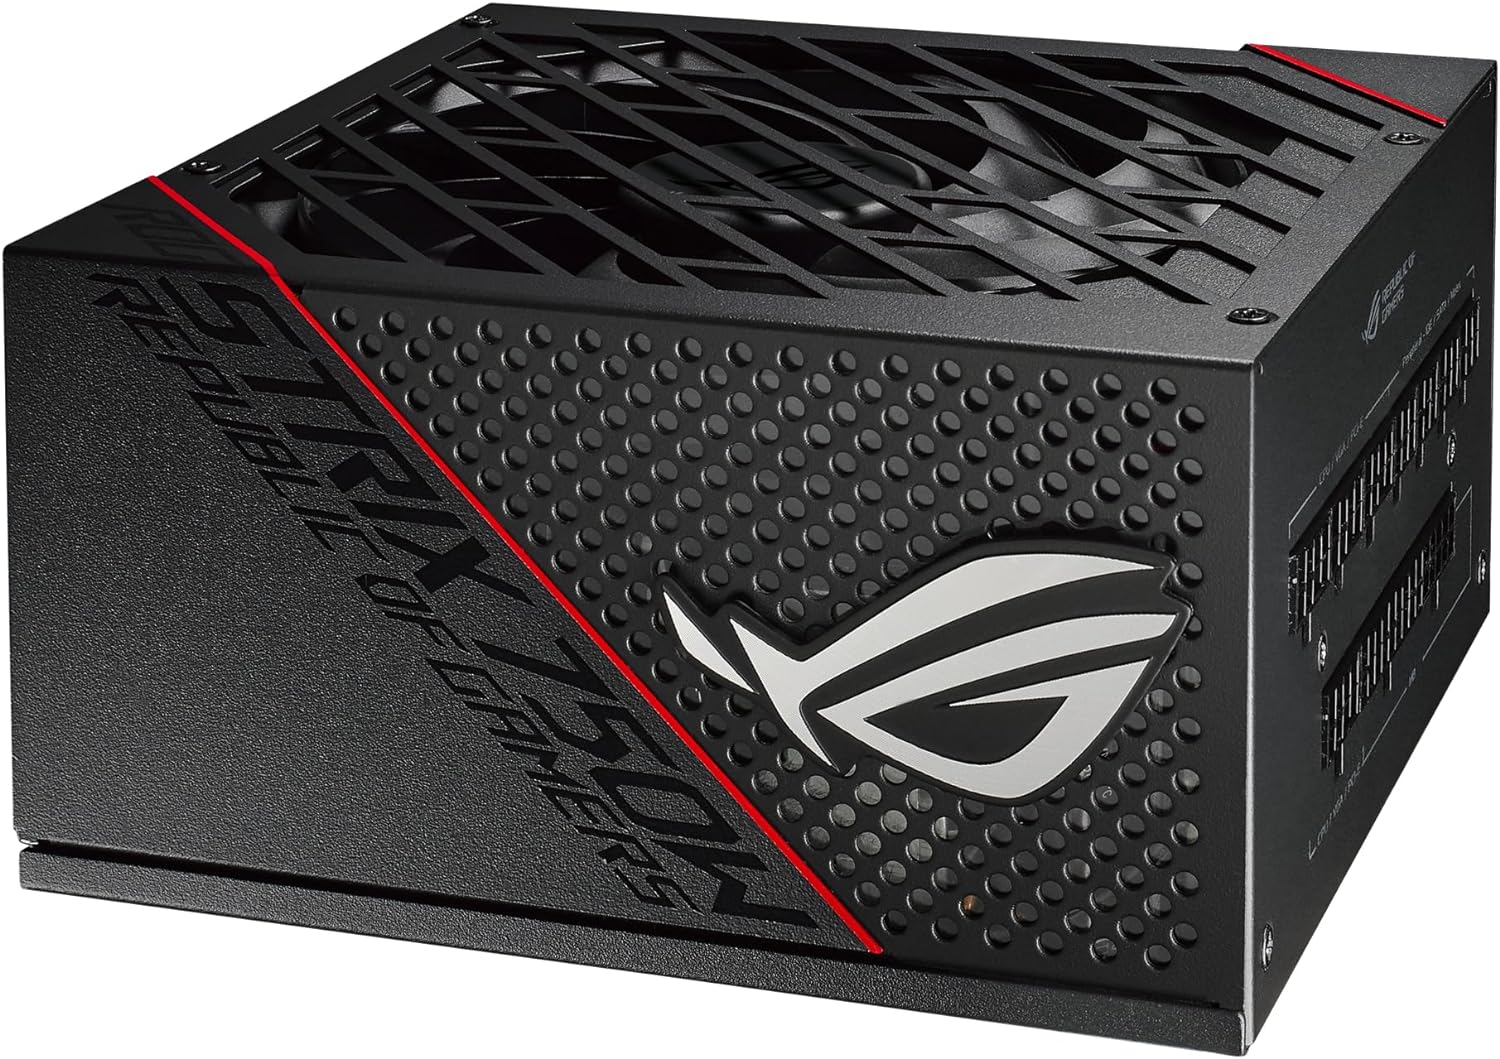 ASUS ROG Strix 750W Gold PSU - Efficient cooling with ROG heatsinks for lower temps and less noise. 4718017375917